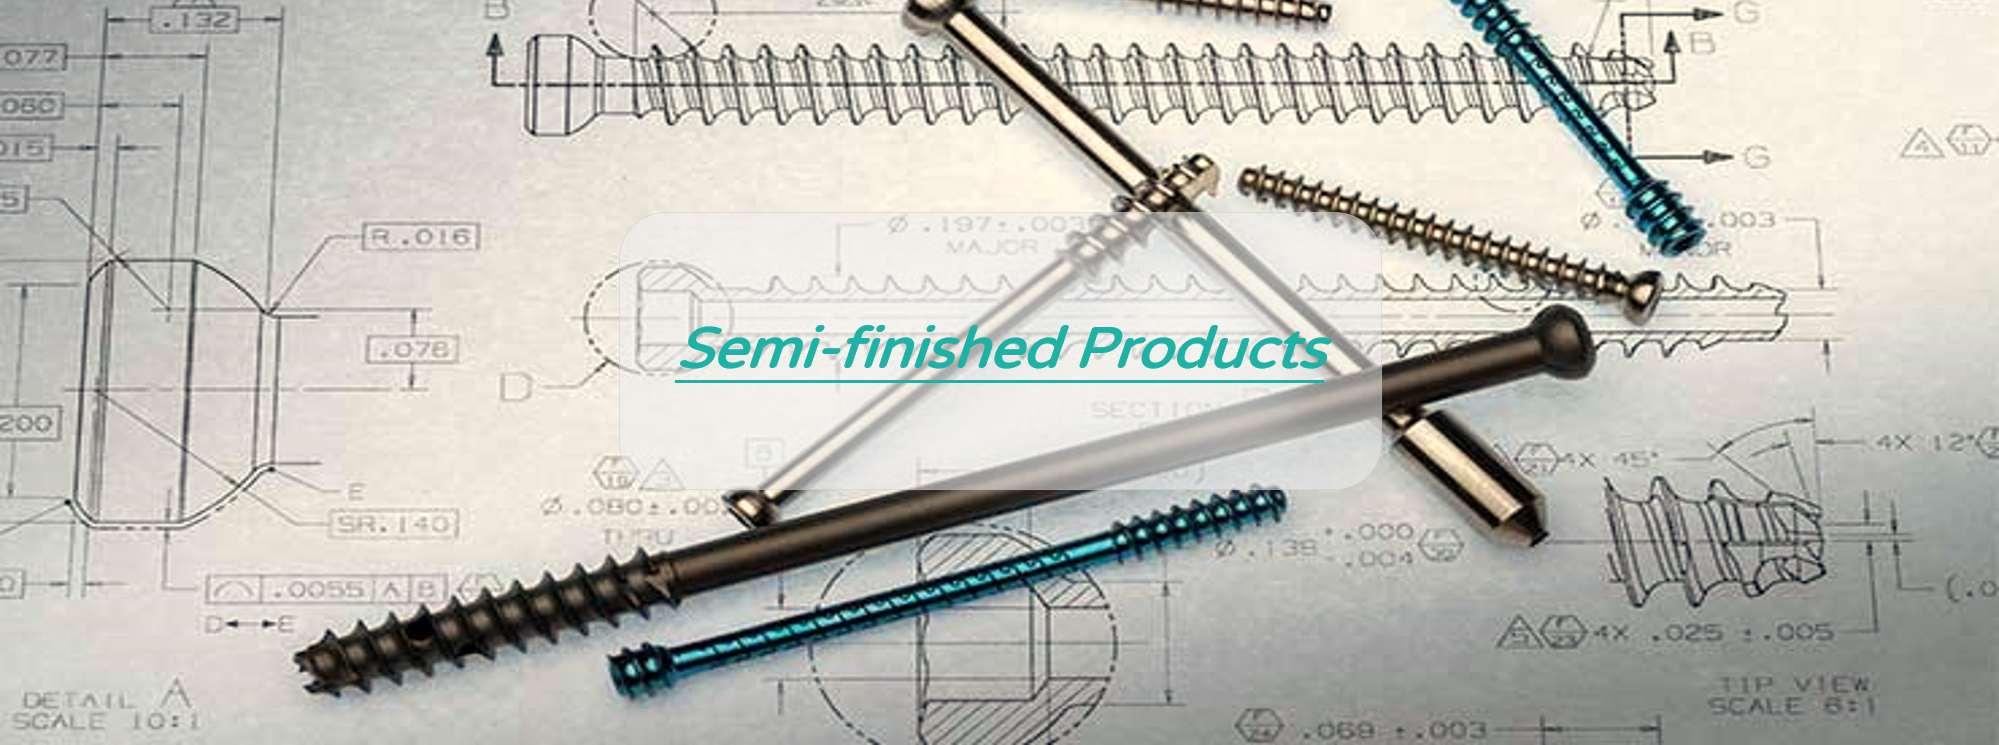 What Are Semi-Finished Goods?